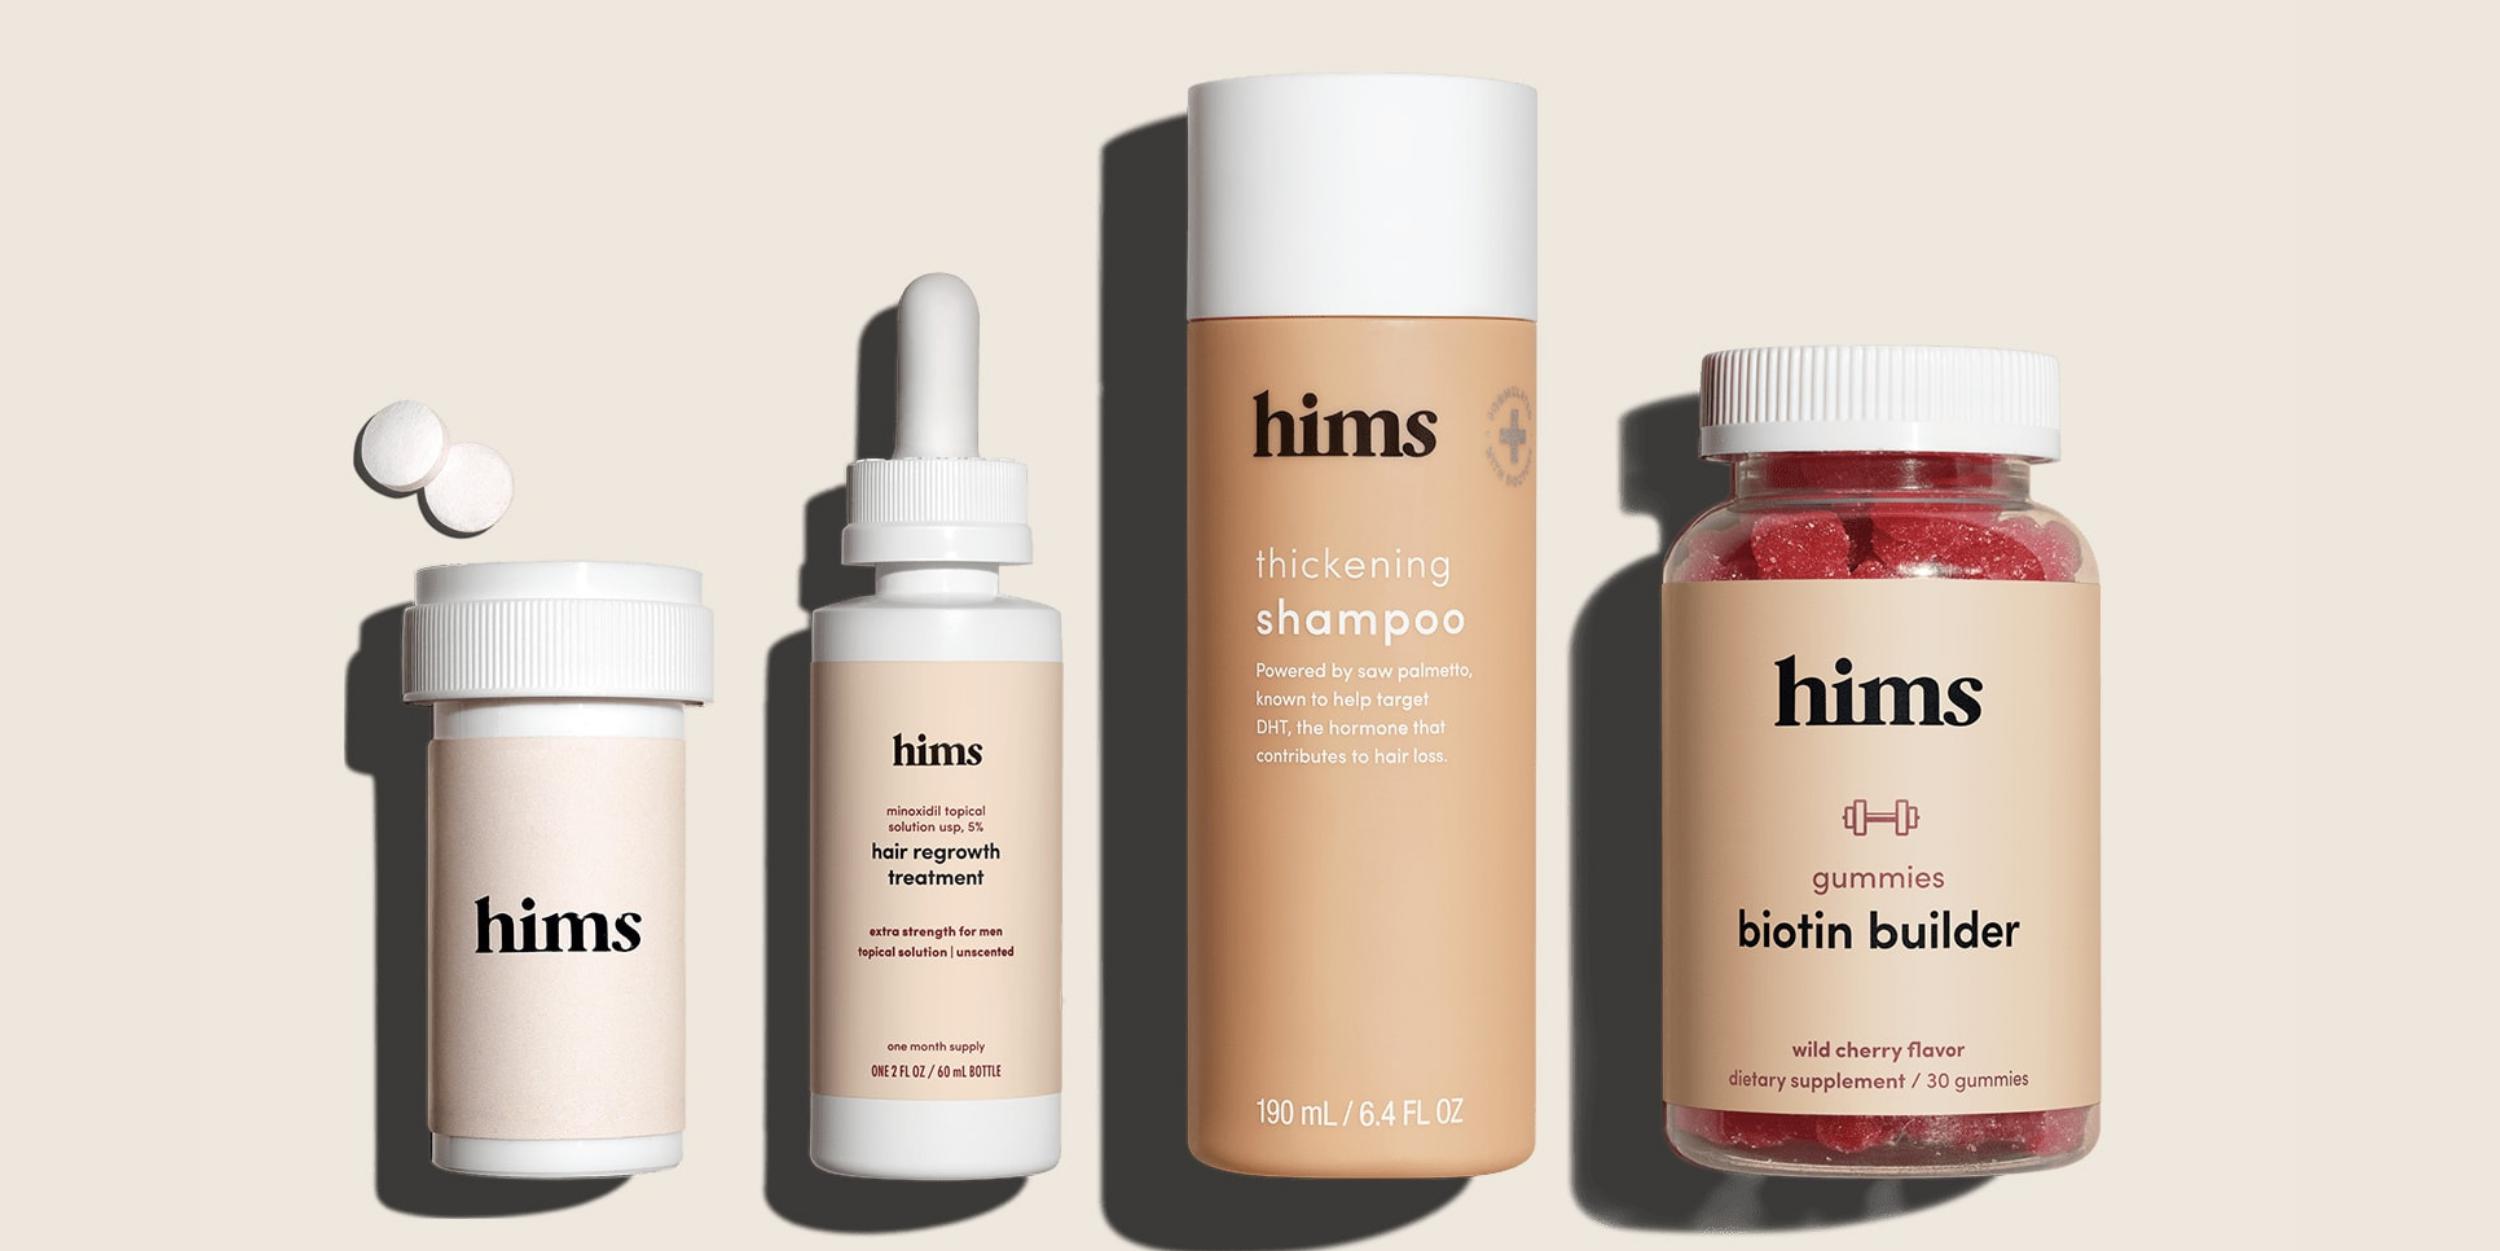 Hims & Hers to acquire London-based Honest Health